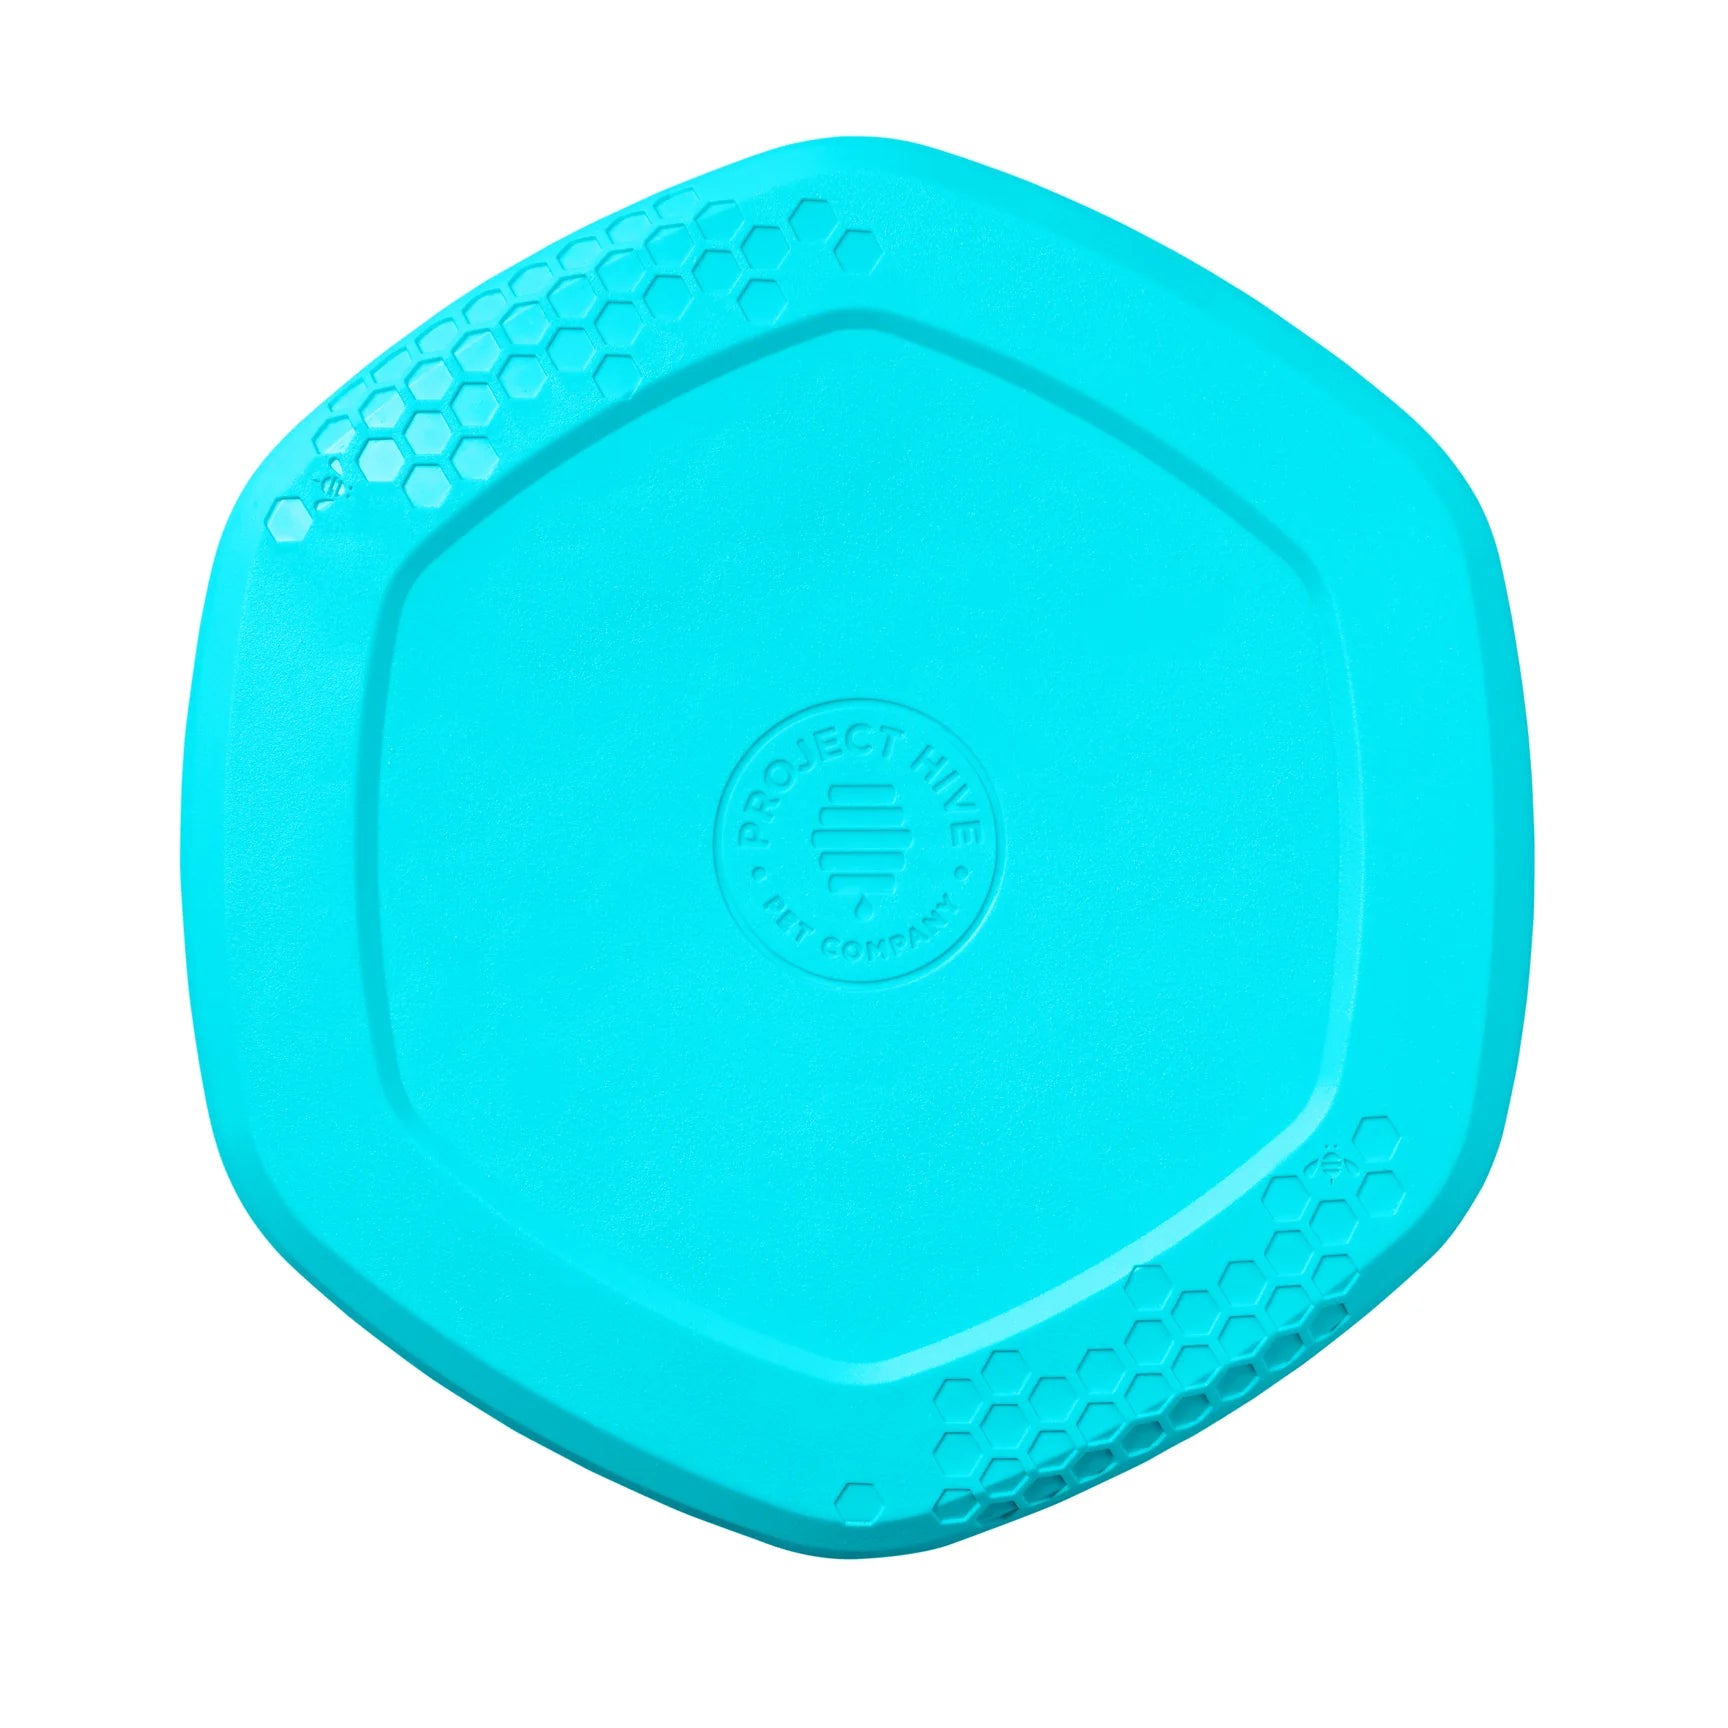 Project Hive Floating Frisbee Disc - Vanilla Scent